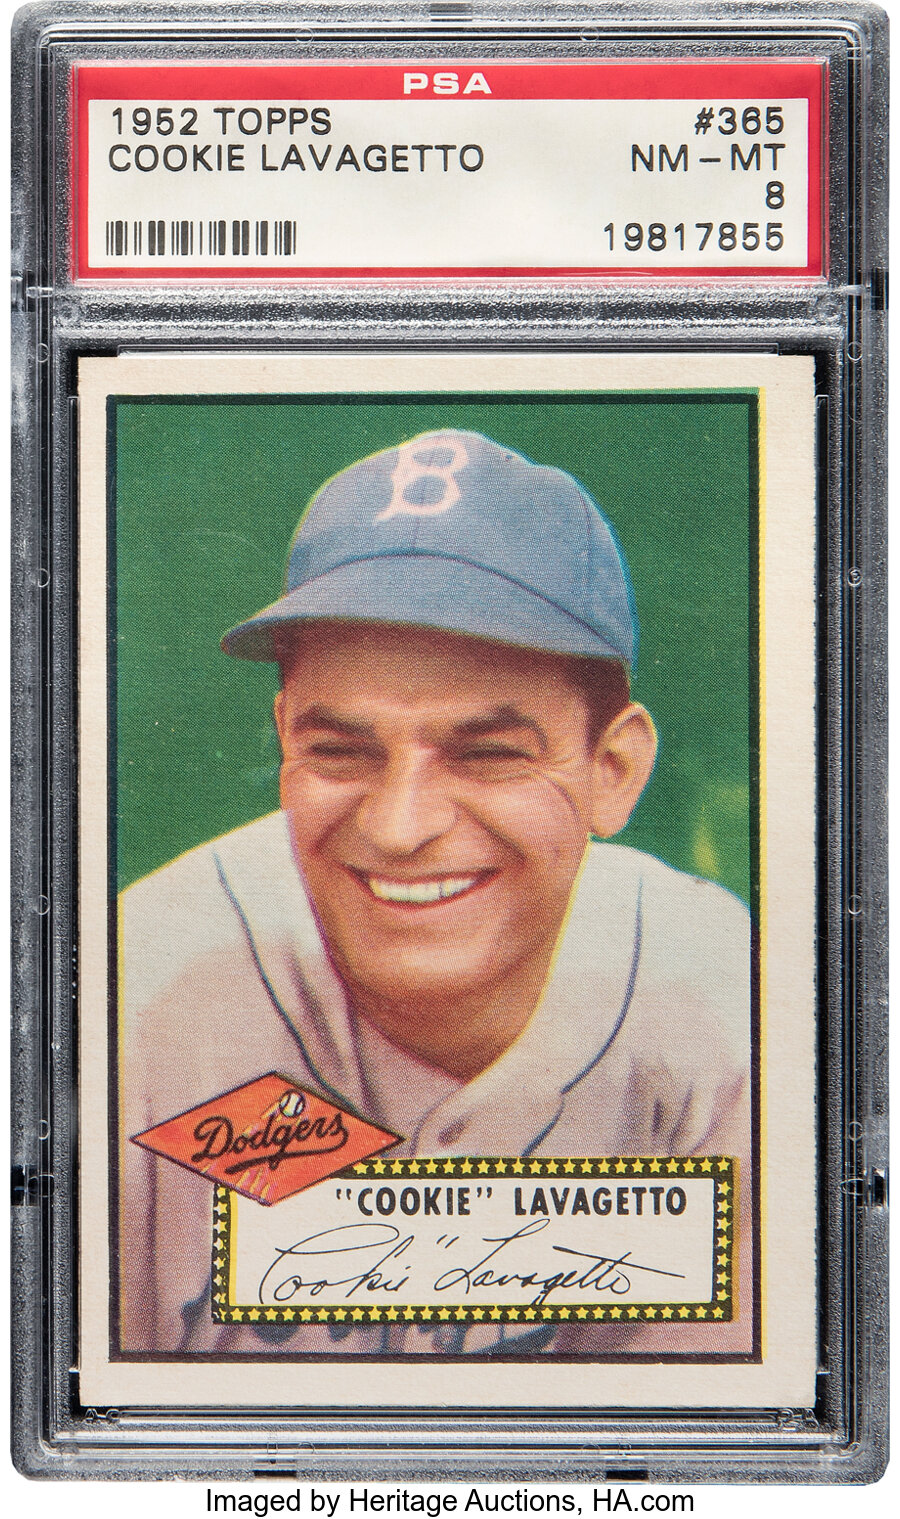 1952 Topps Cookie Lavagetto #365 PSA NM-MT 8